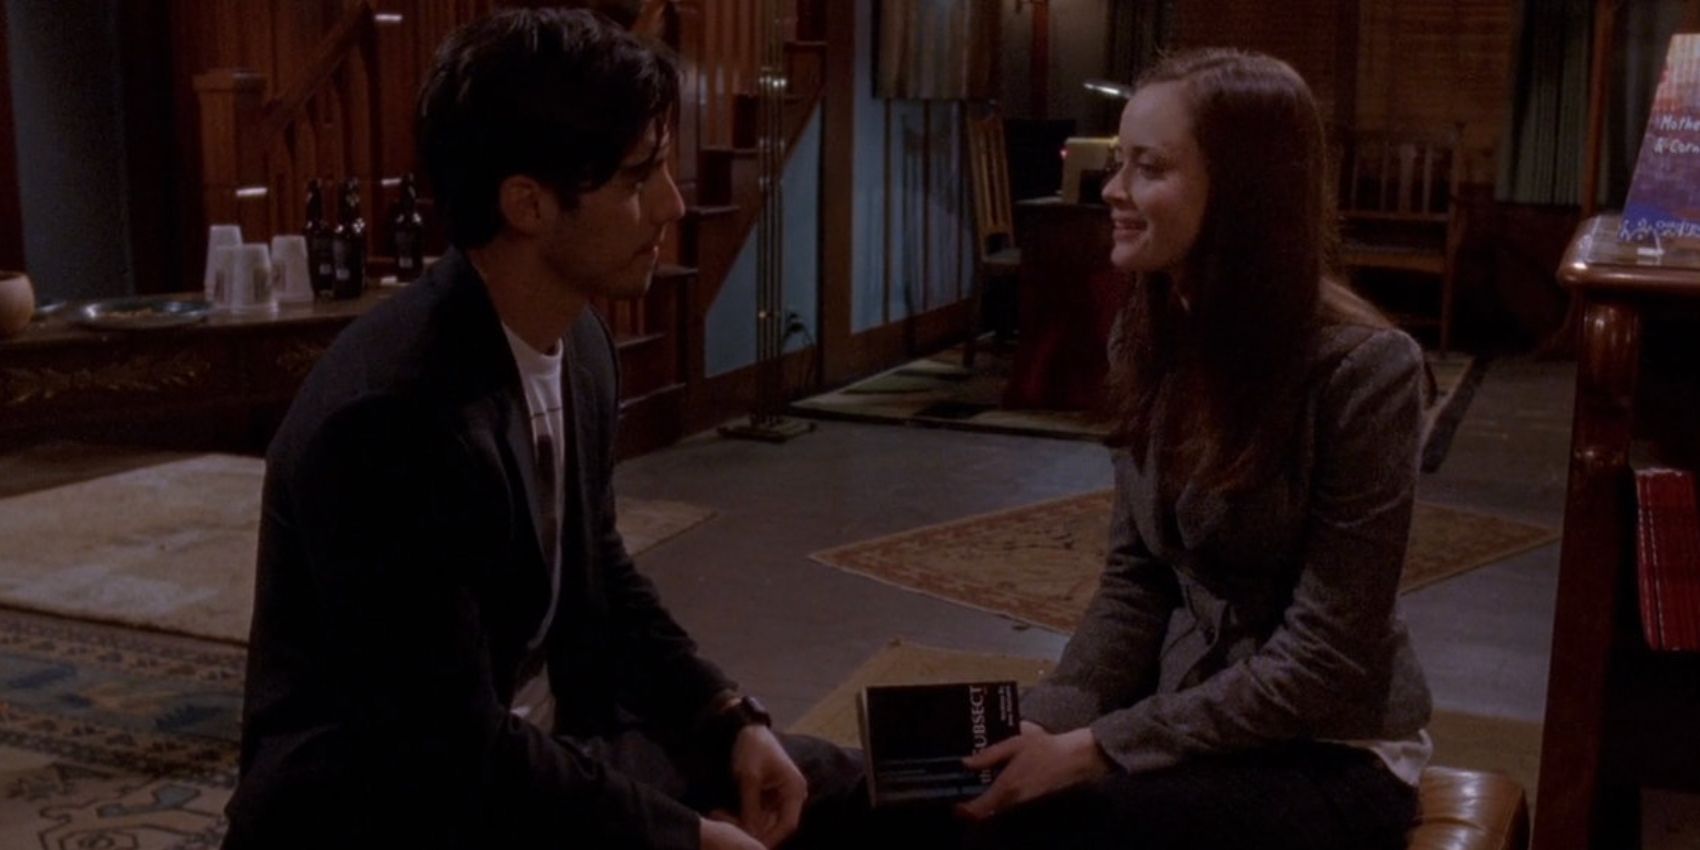 Jess and Rory talk in the Gilmore Girls episode "The Real Paul Anka"